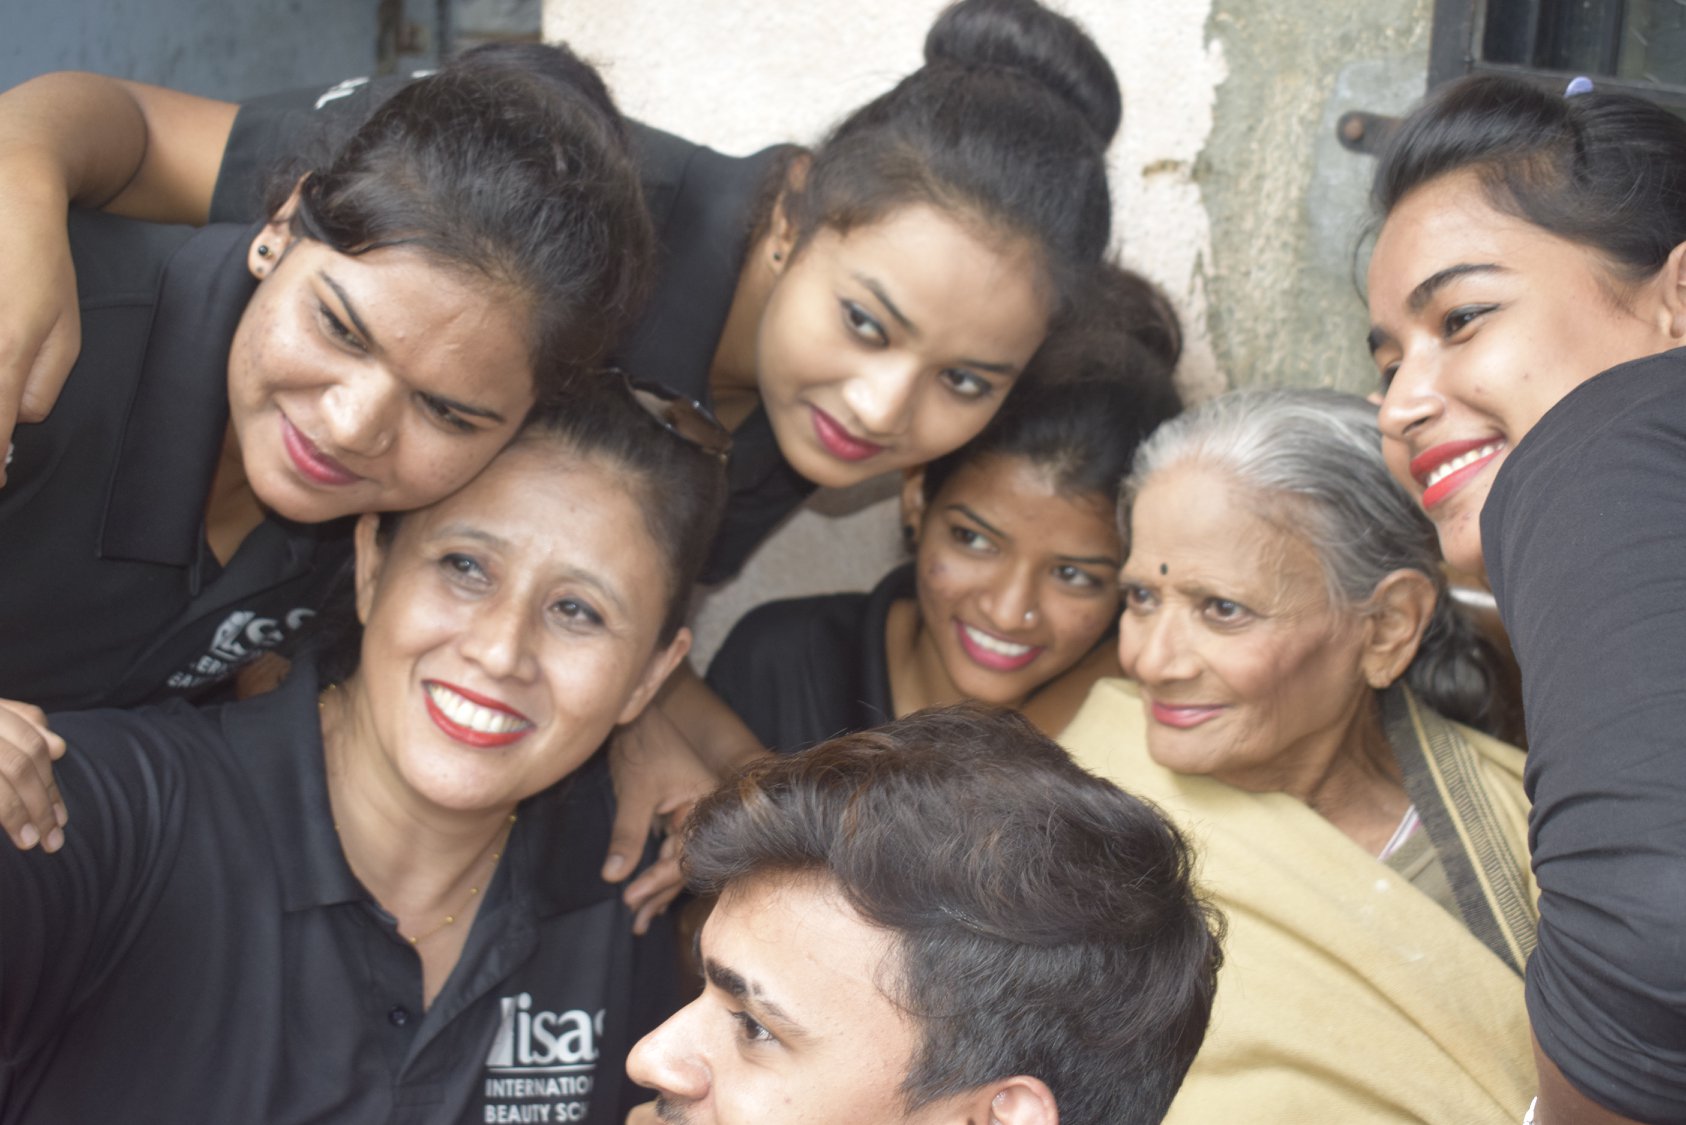 Old age home by rejuvenating the elderly looks by makeup and hair